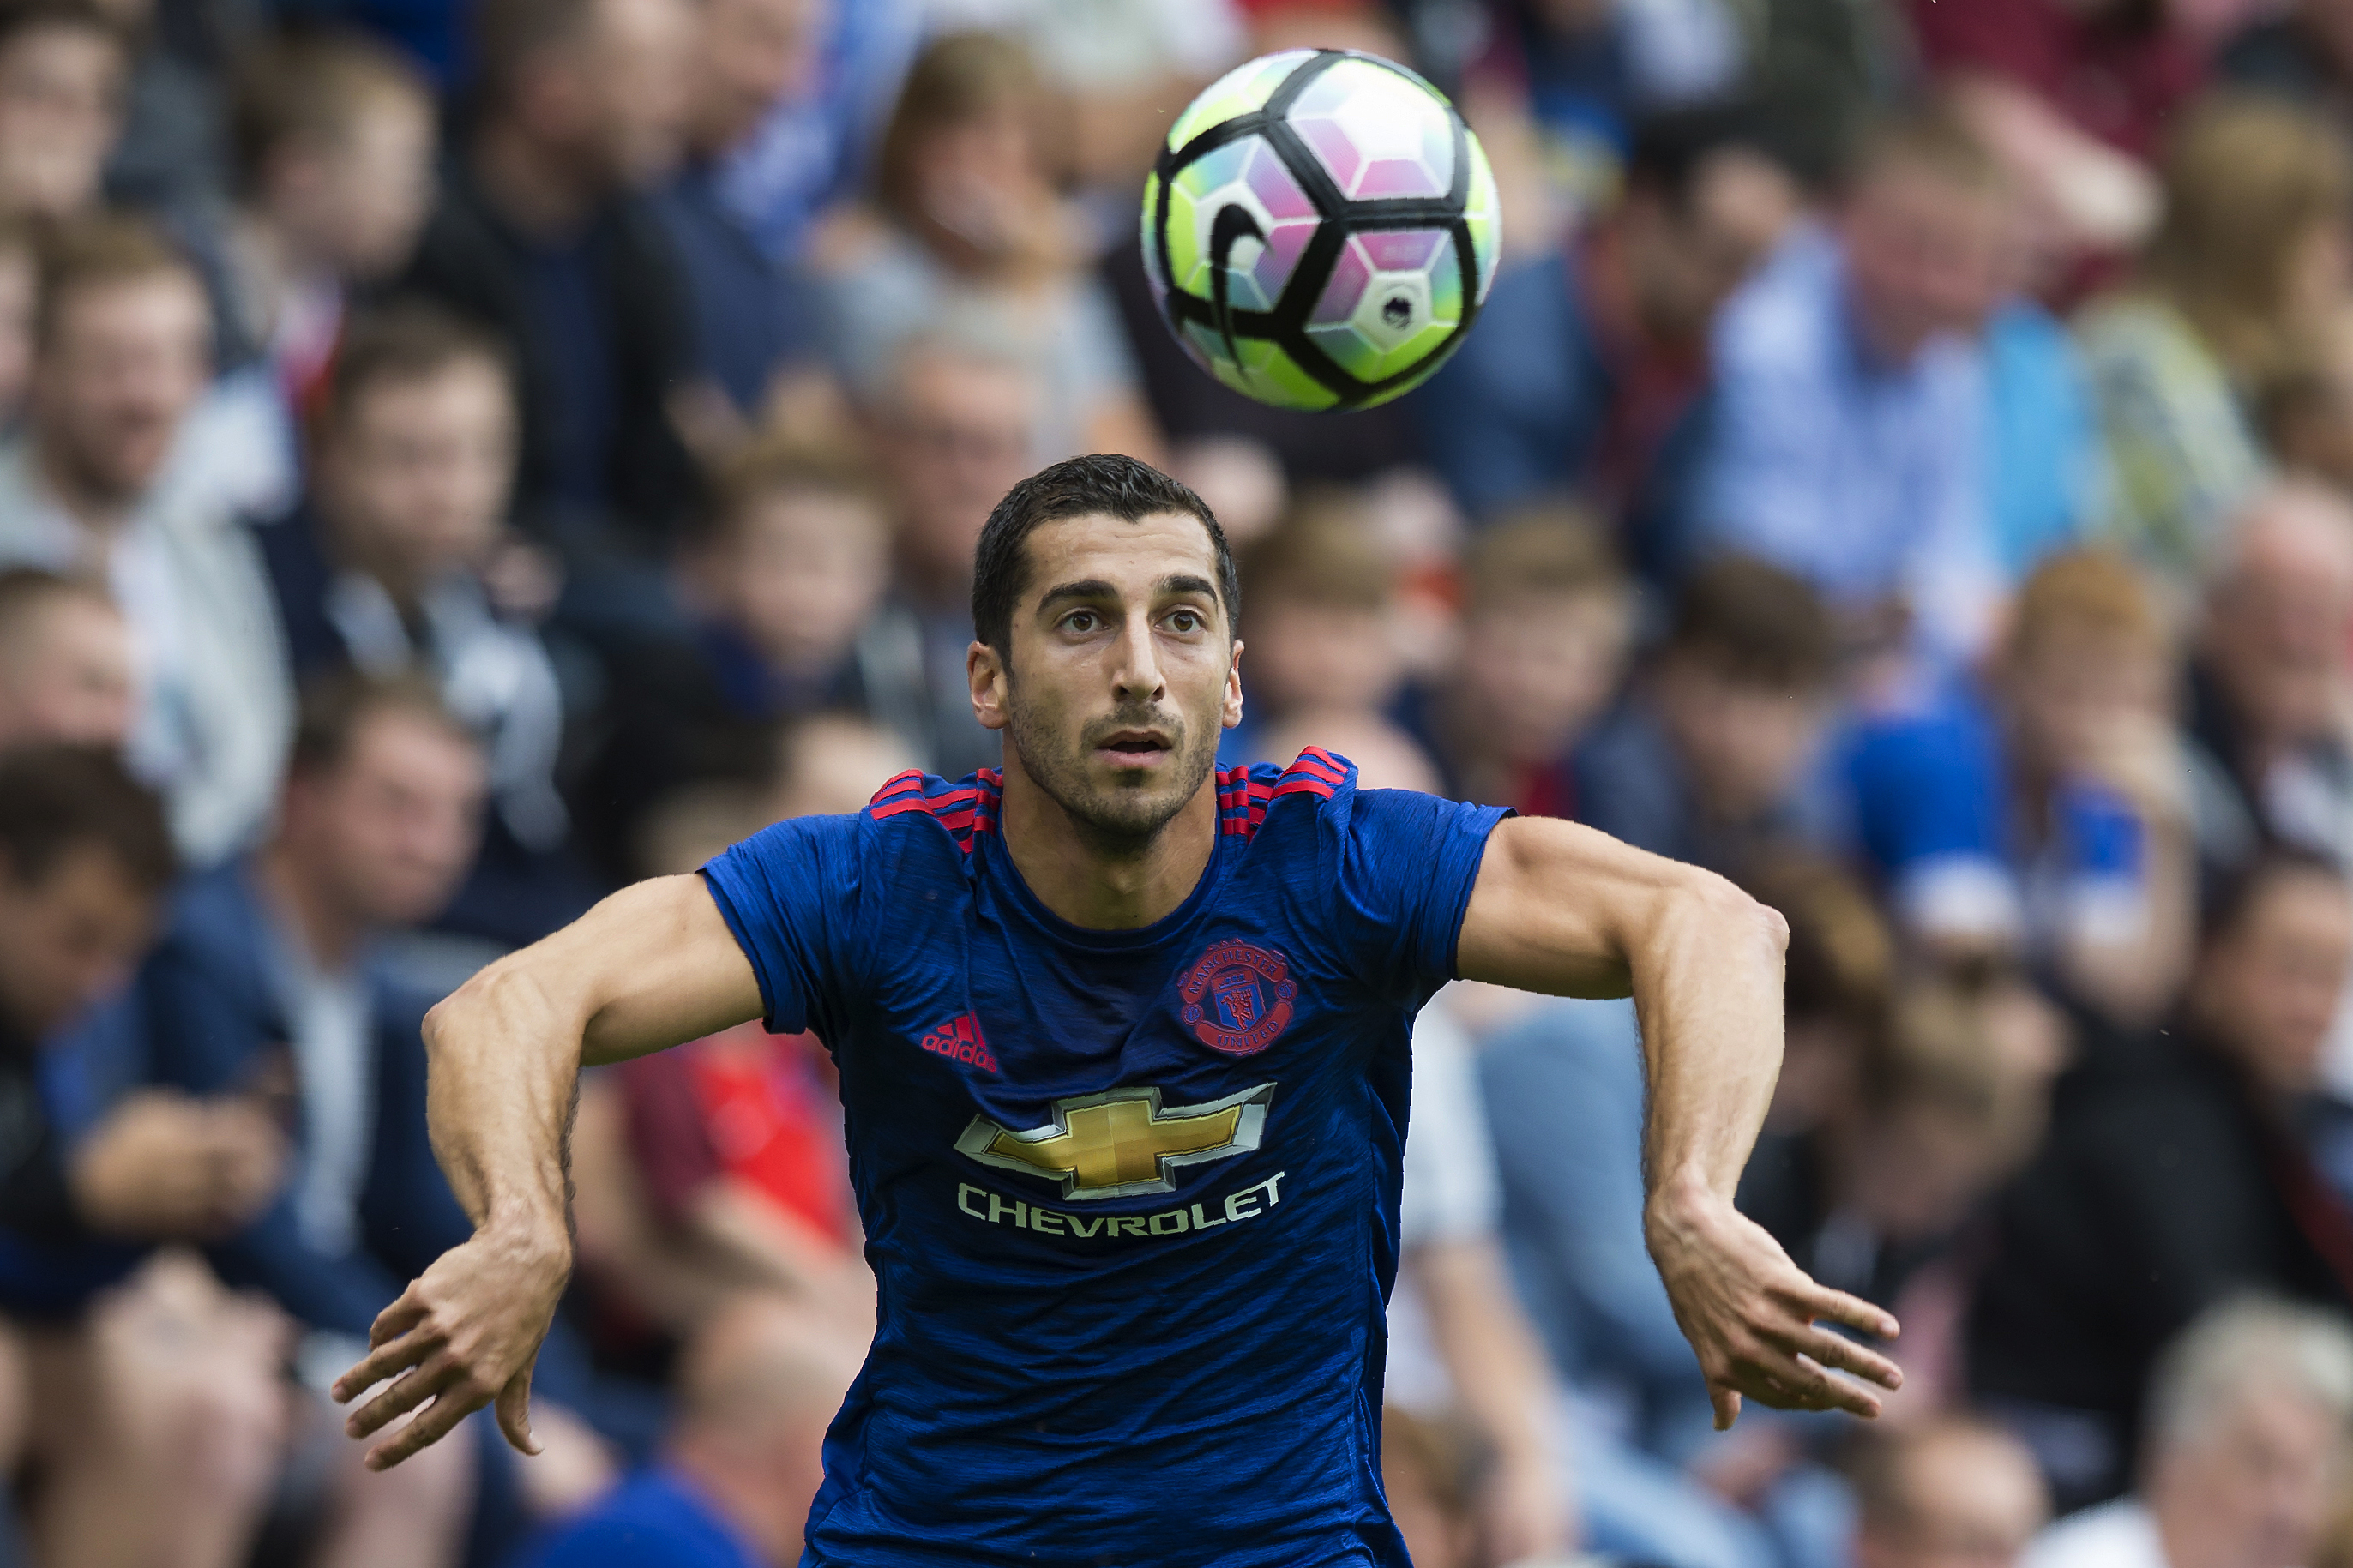 Manchester United's Armenian midfielder Henrikh Mkhitaryan controls the ball during the pre-season friendly football match between Wigan Athletic and Manchester United at the DW stadium in Wigan, northwest England, on July 16, 2016.  / AFP / JON SUPER / RESTRICTED TO EDITORIAL USE. No use with unauthorized audio, video, data, fixture lists, club/league logos or 'live' services. Online in-match use limited to 75 images, no video emulation. No use in betting, games or single club/league/player publications.  /         (Photo credit should read JON SUPER/AFP/Getty Images)